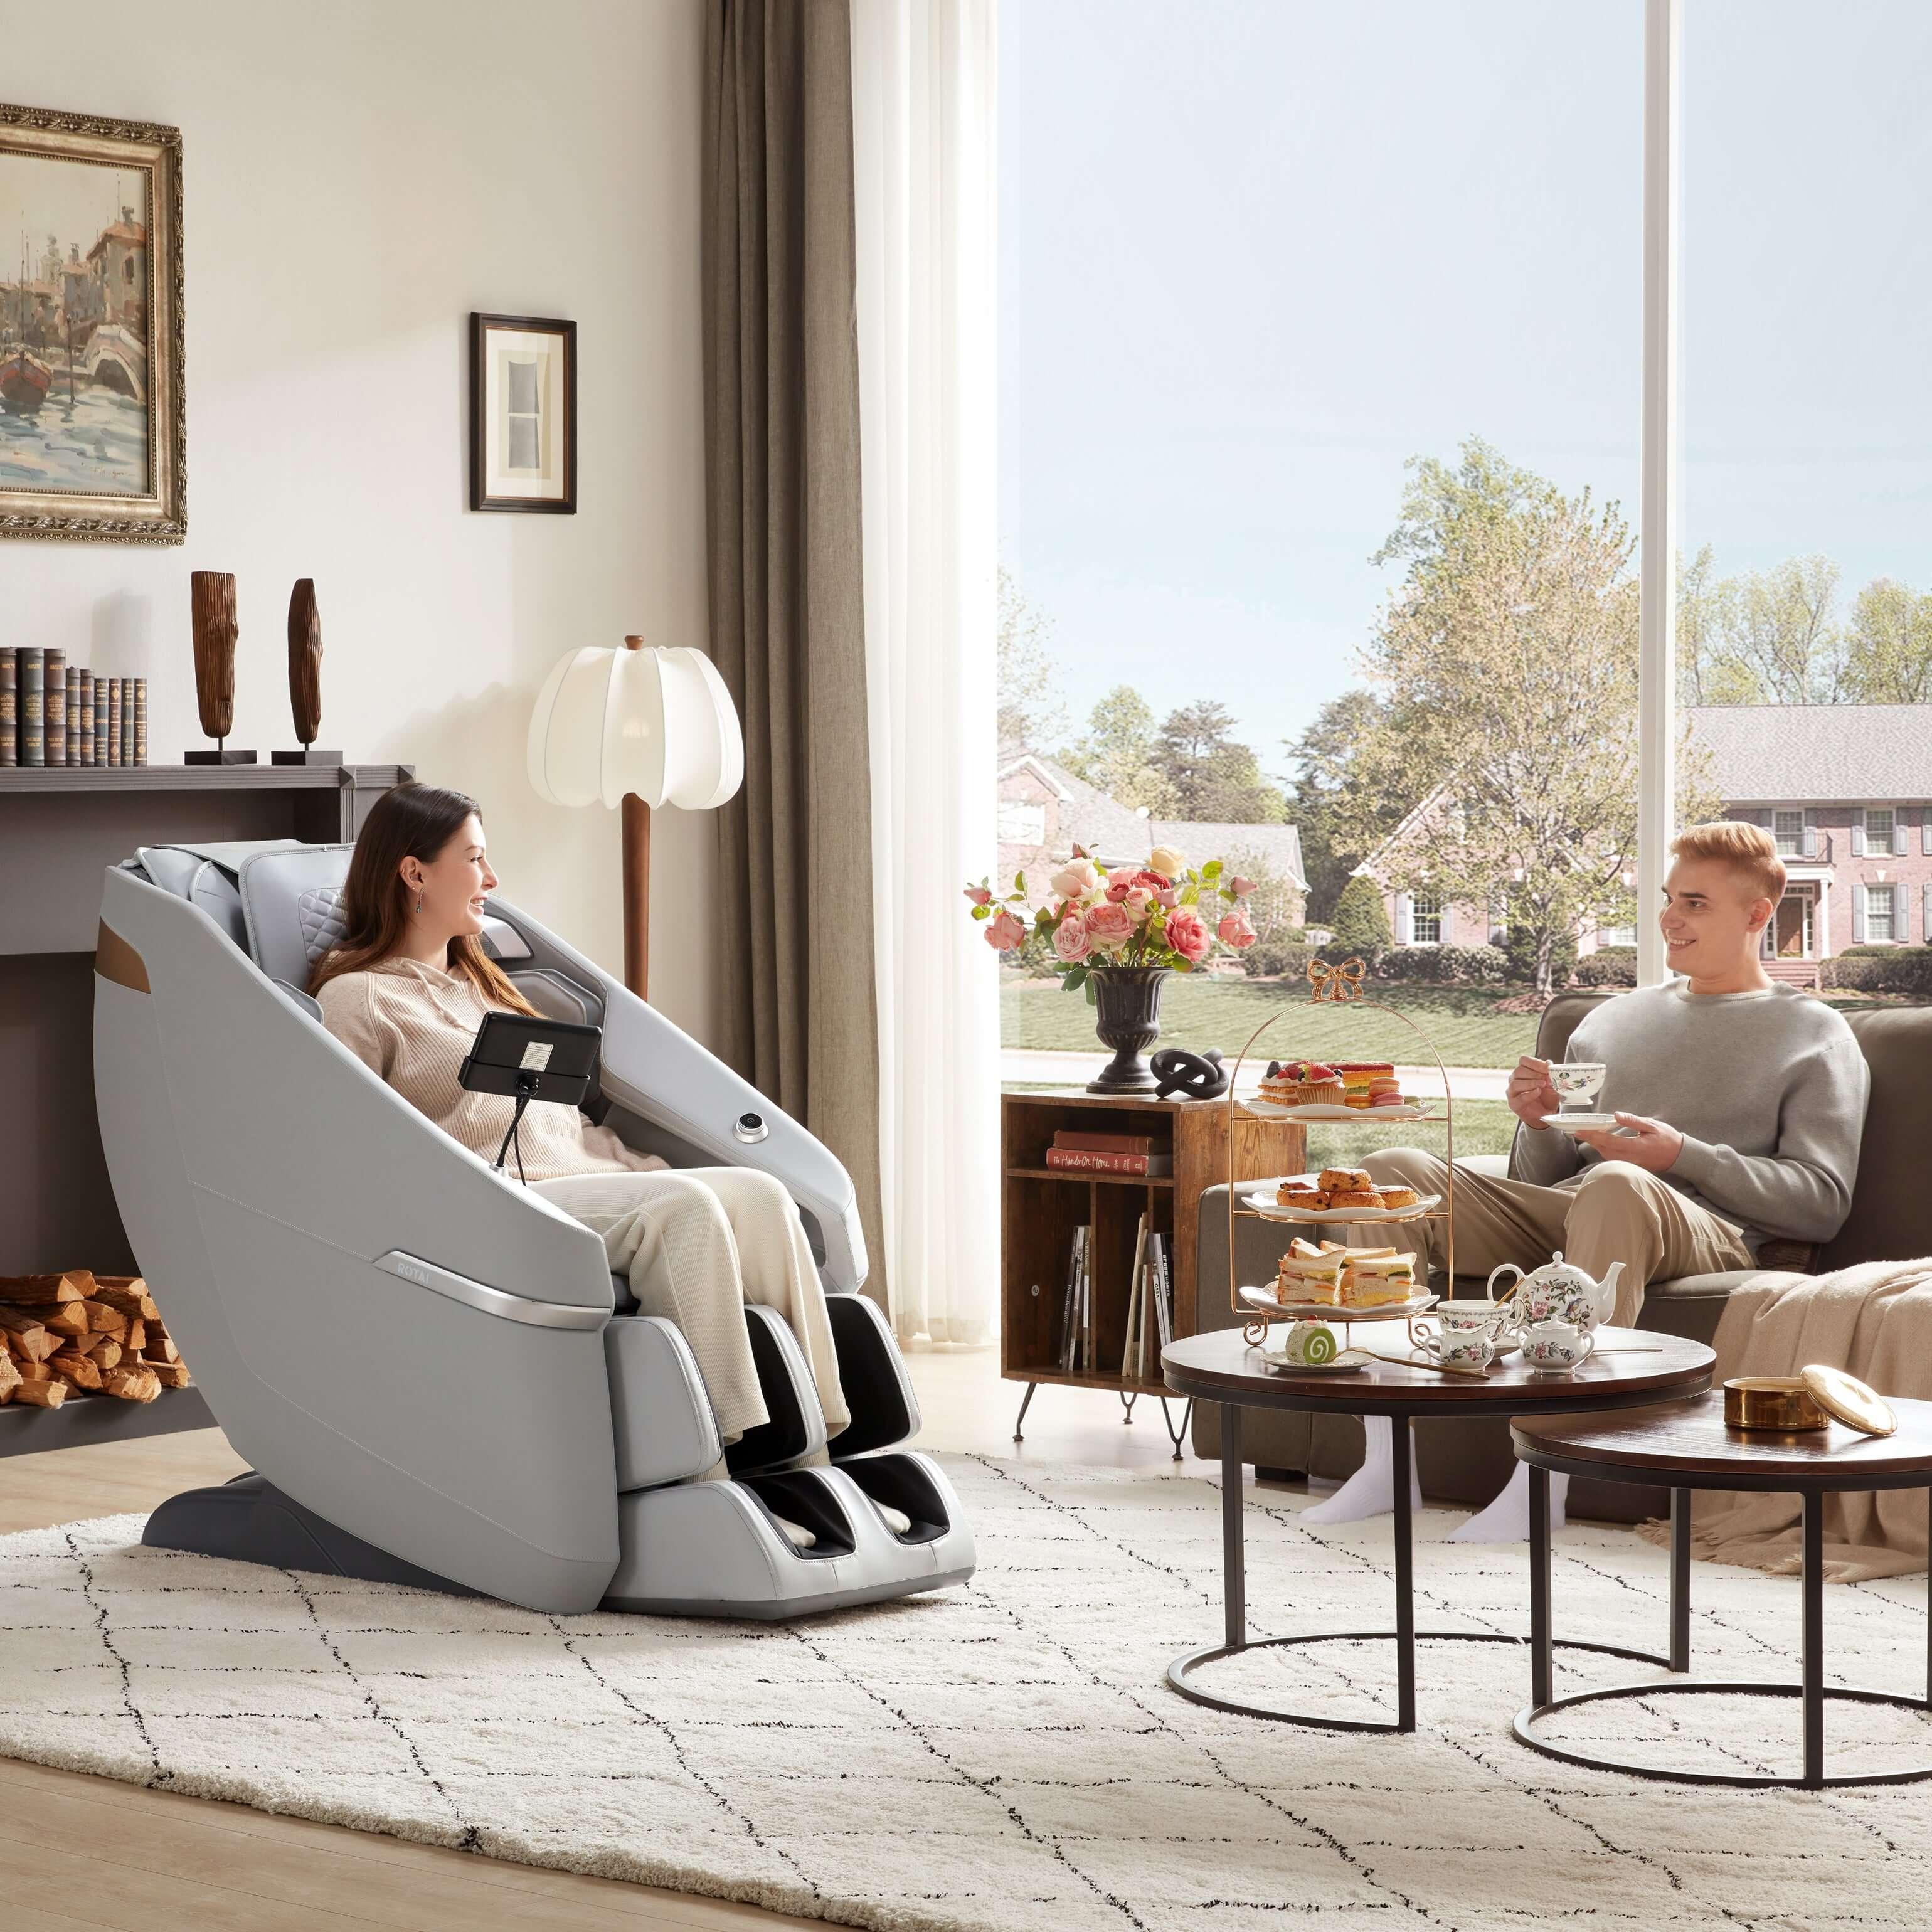 Woman using Ekanite Massage Chair and Sofa in living room with tablet control while man relaxes, showcasing best massage chair in UAE.